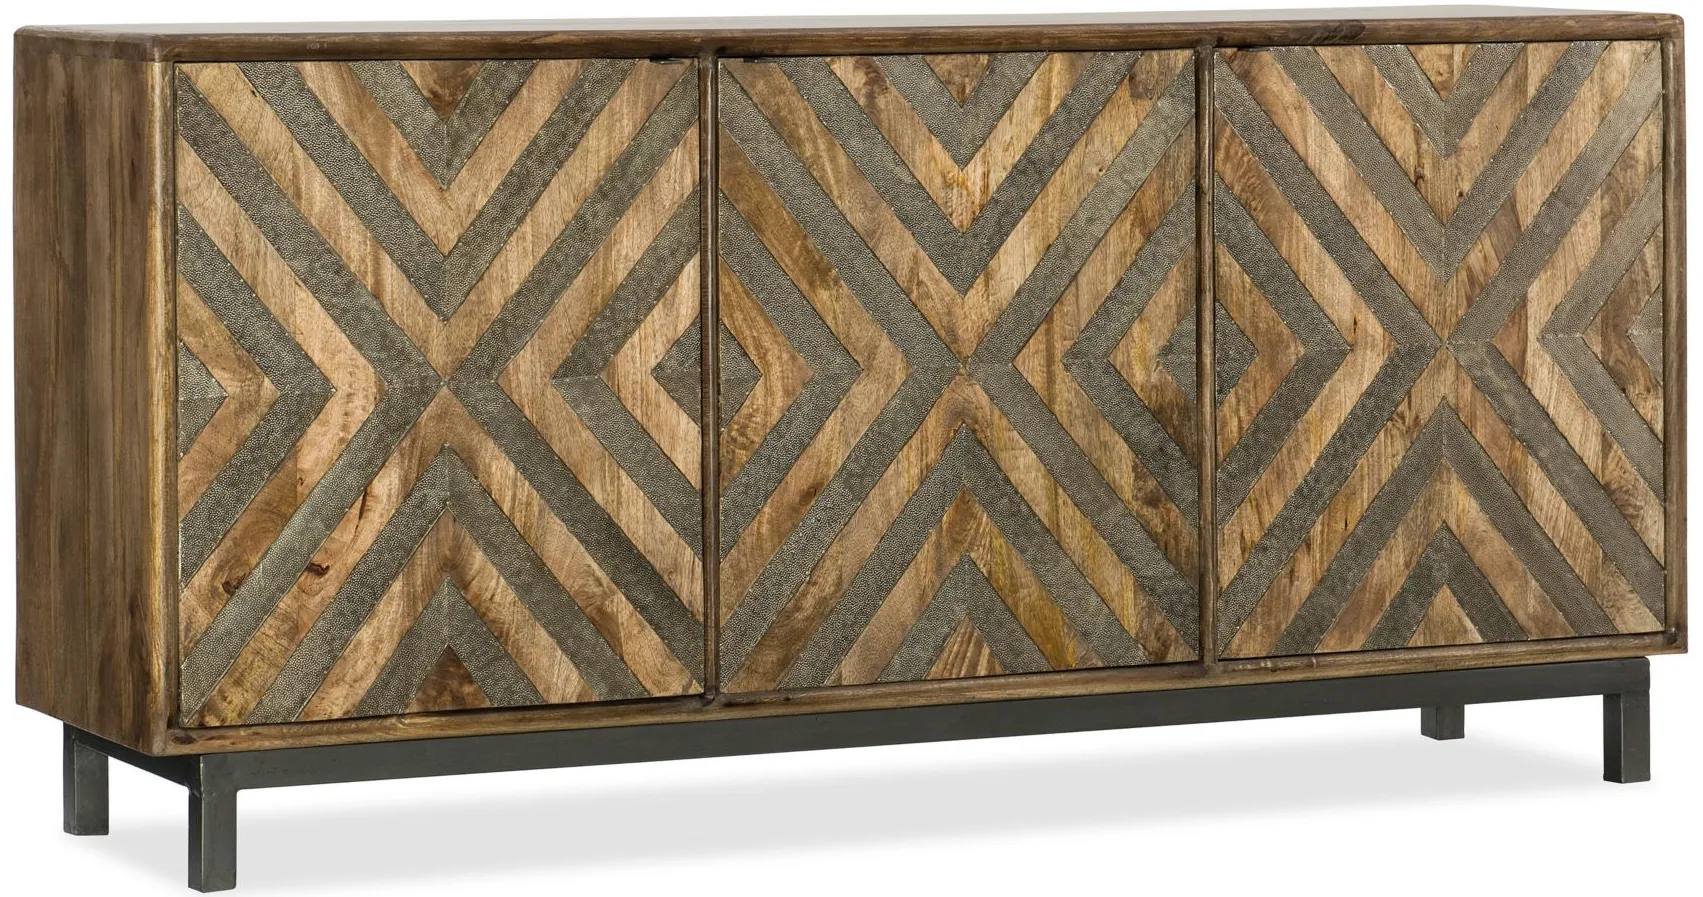 Serramonte Three-Door Entertainment Console in Brown by Hooker Furniture